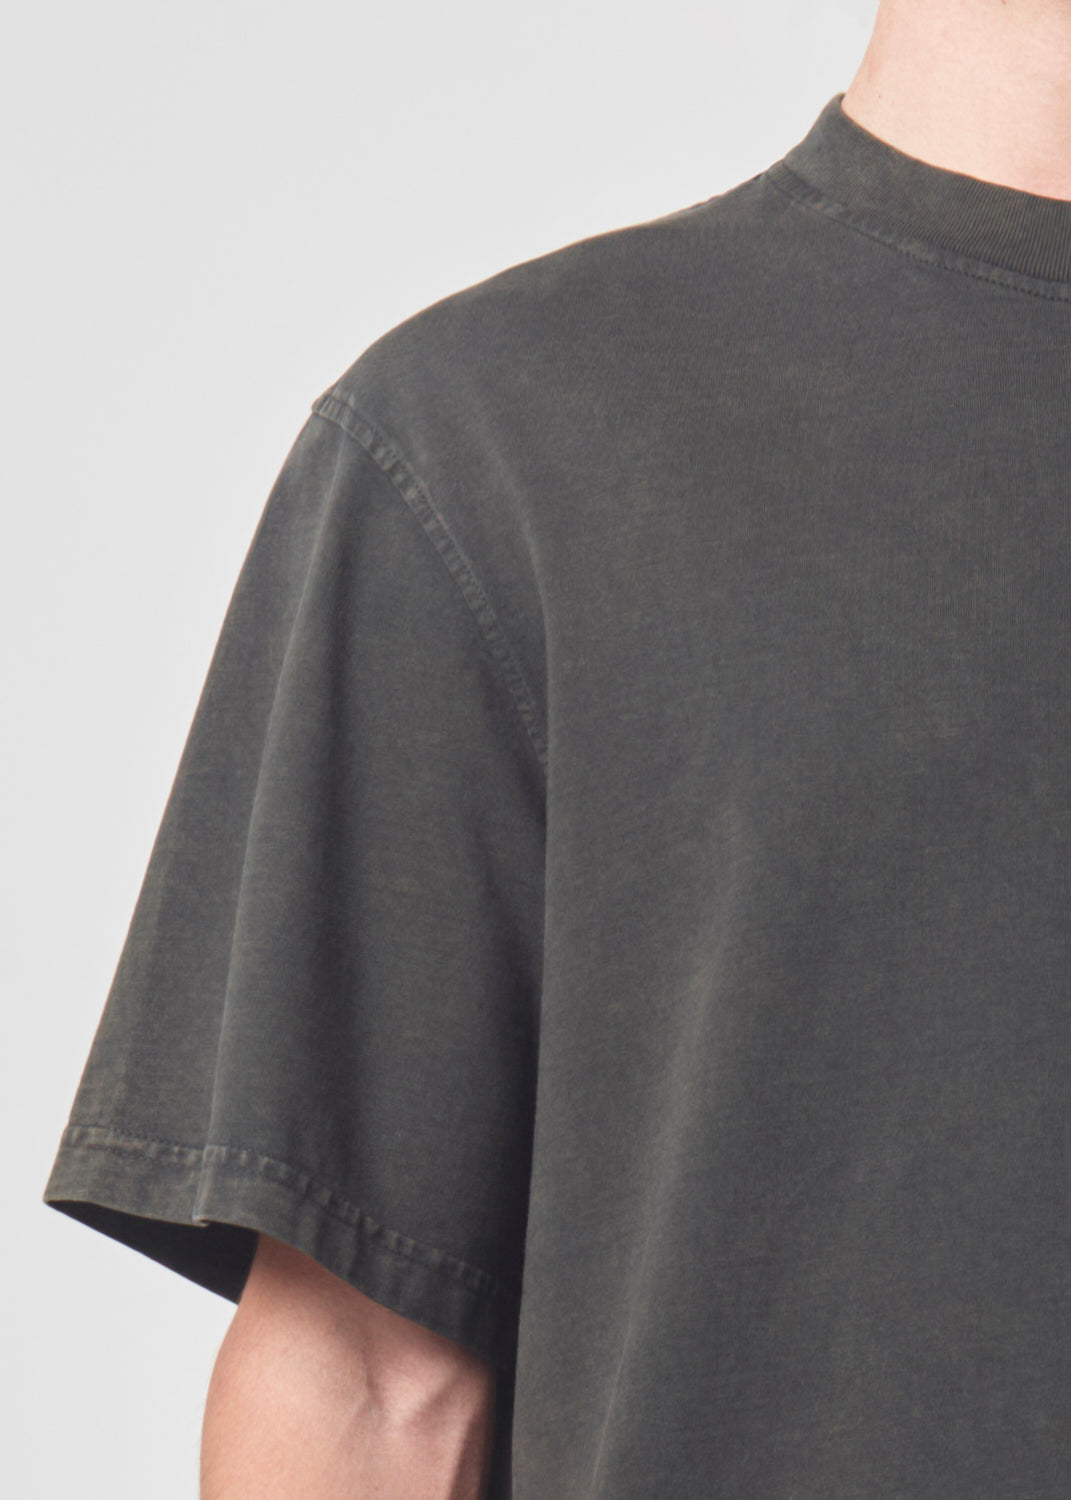 Asha Mock Neck Tee in Fracture close up